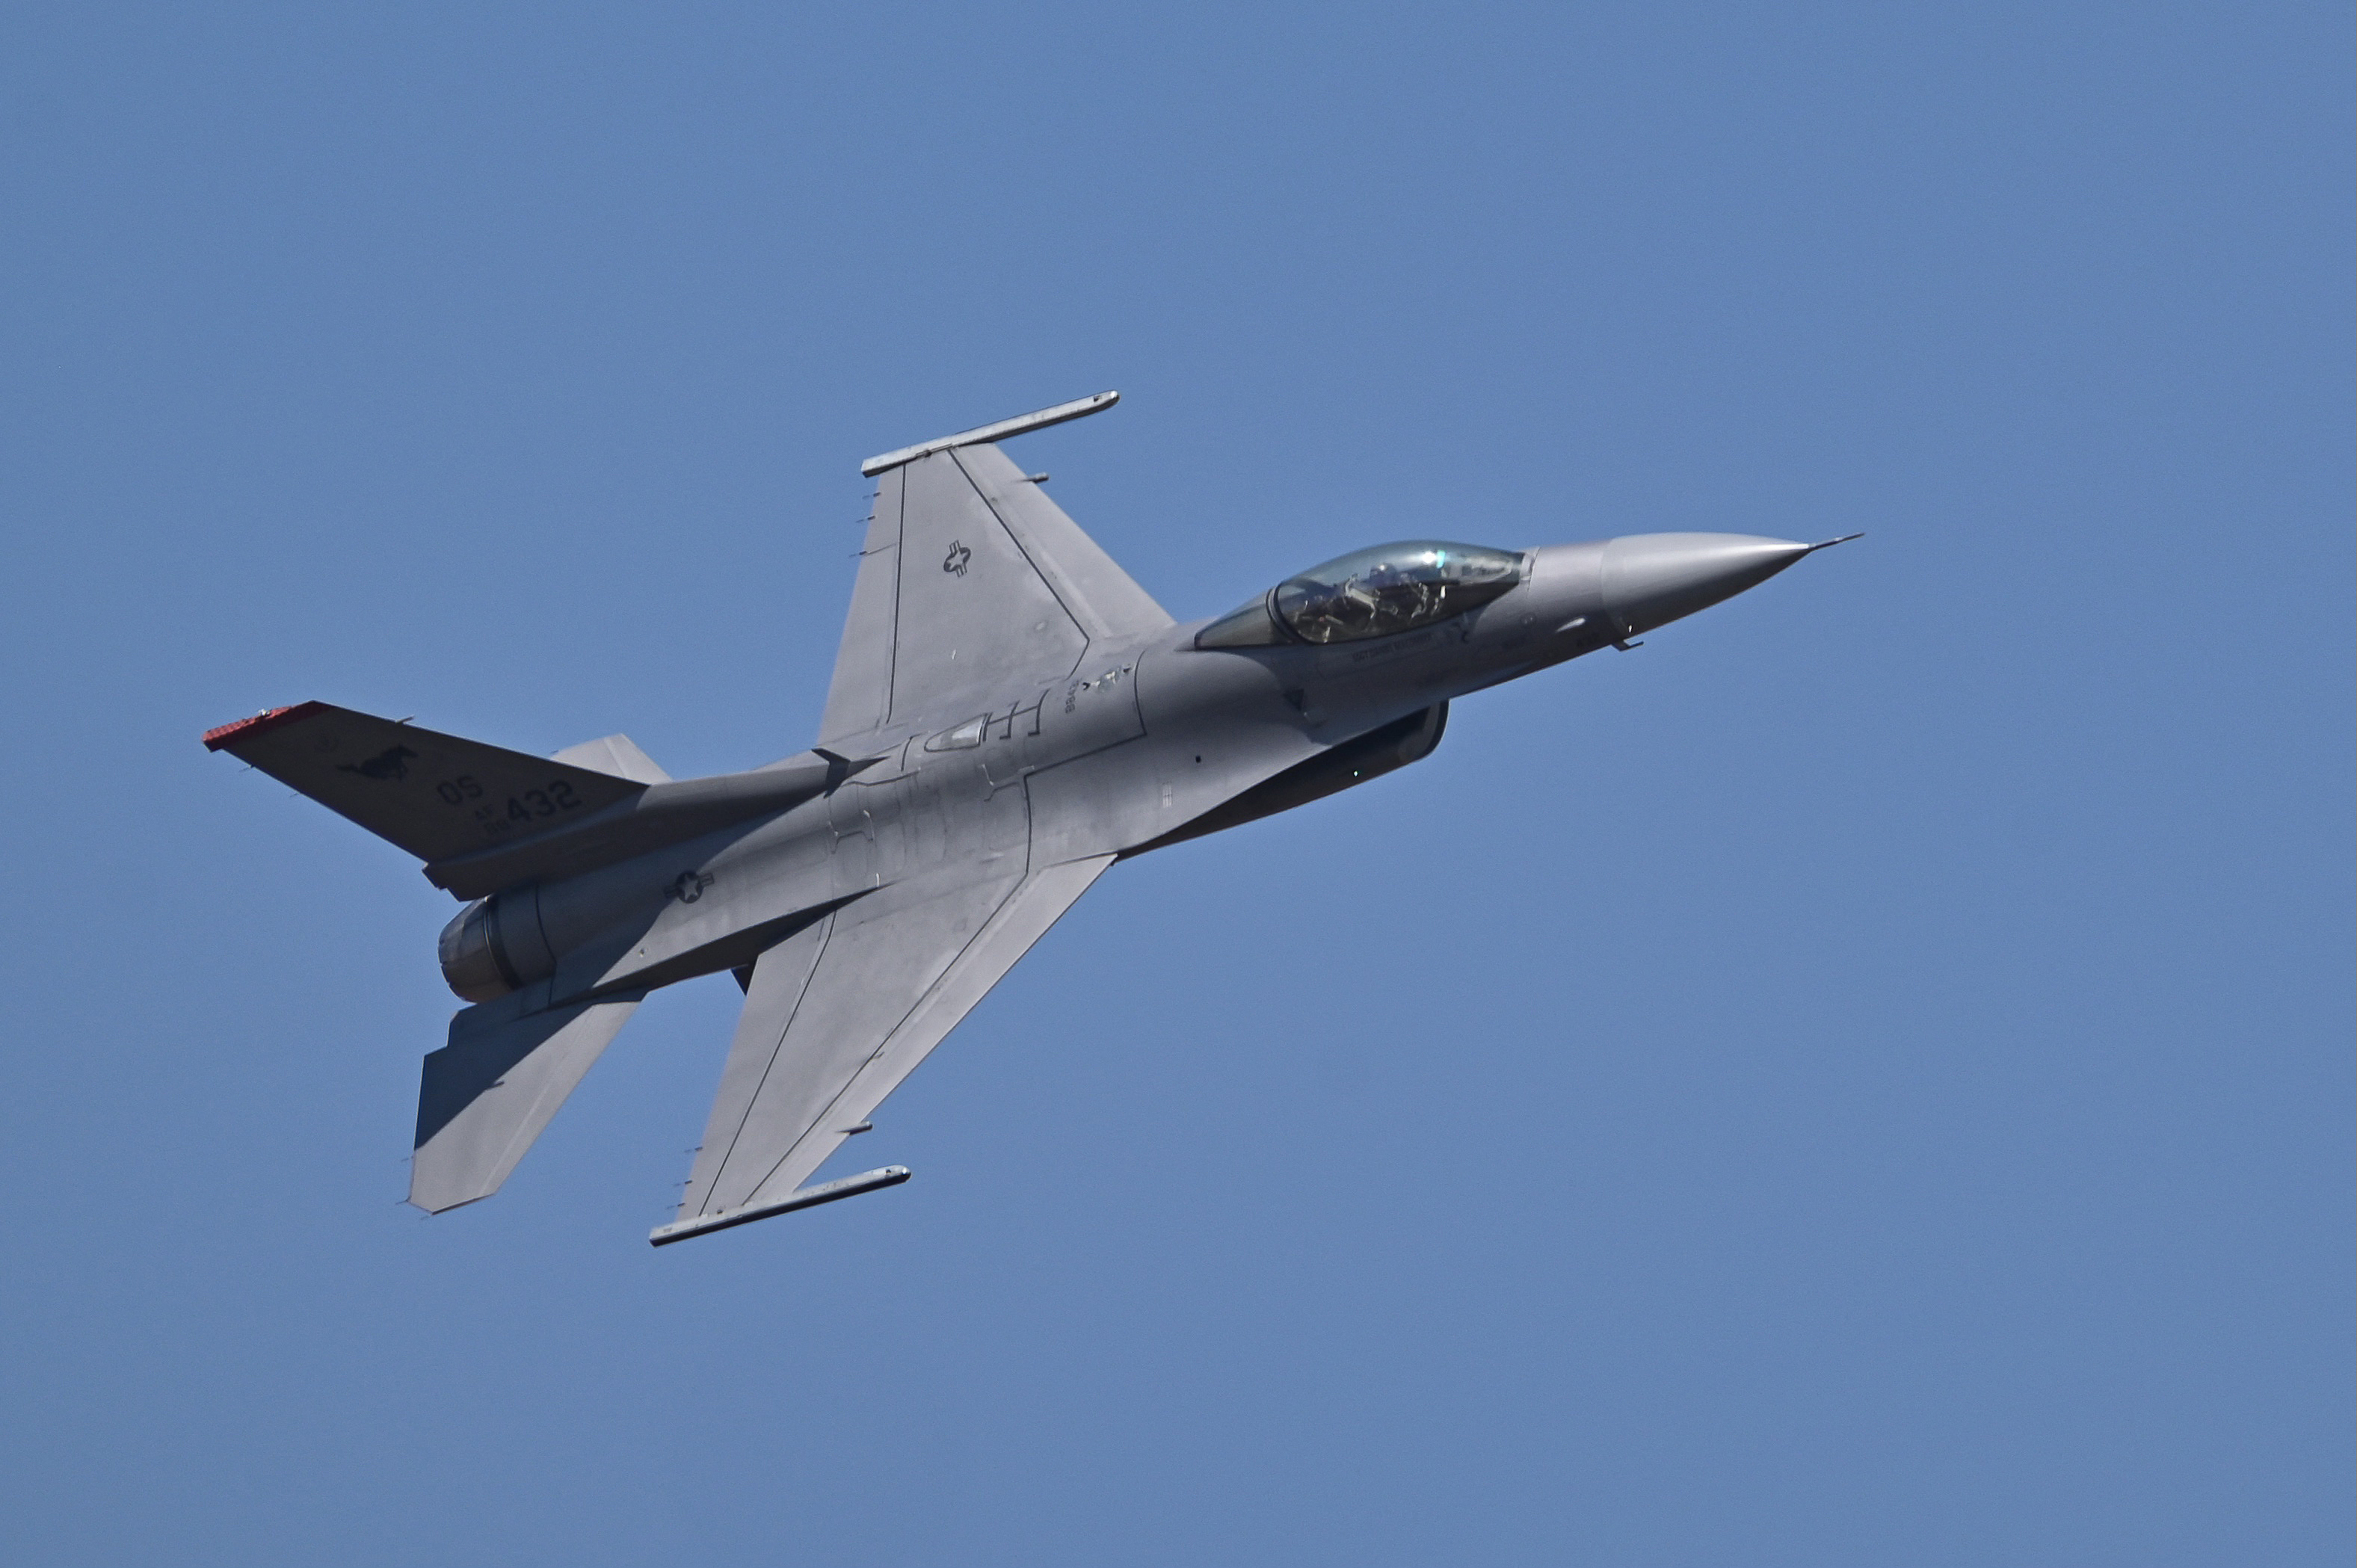 f-16 fighting falcon crashes in new mexico: everything we know